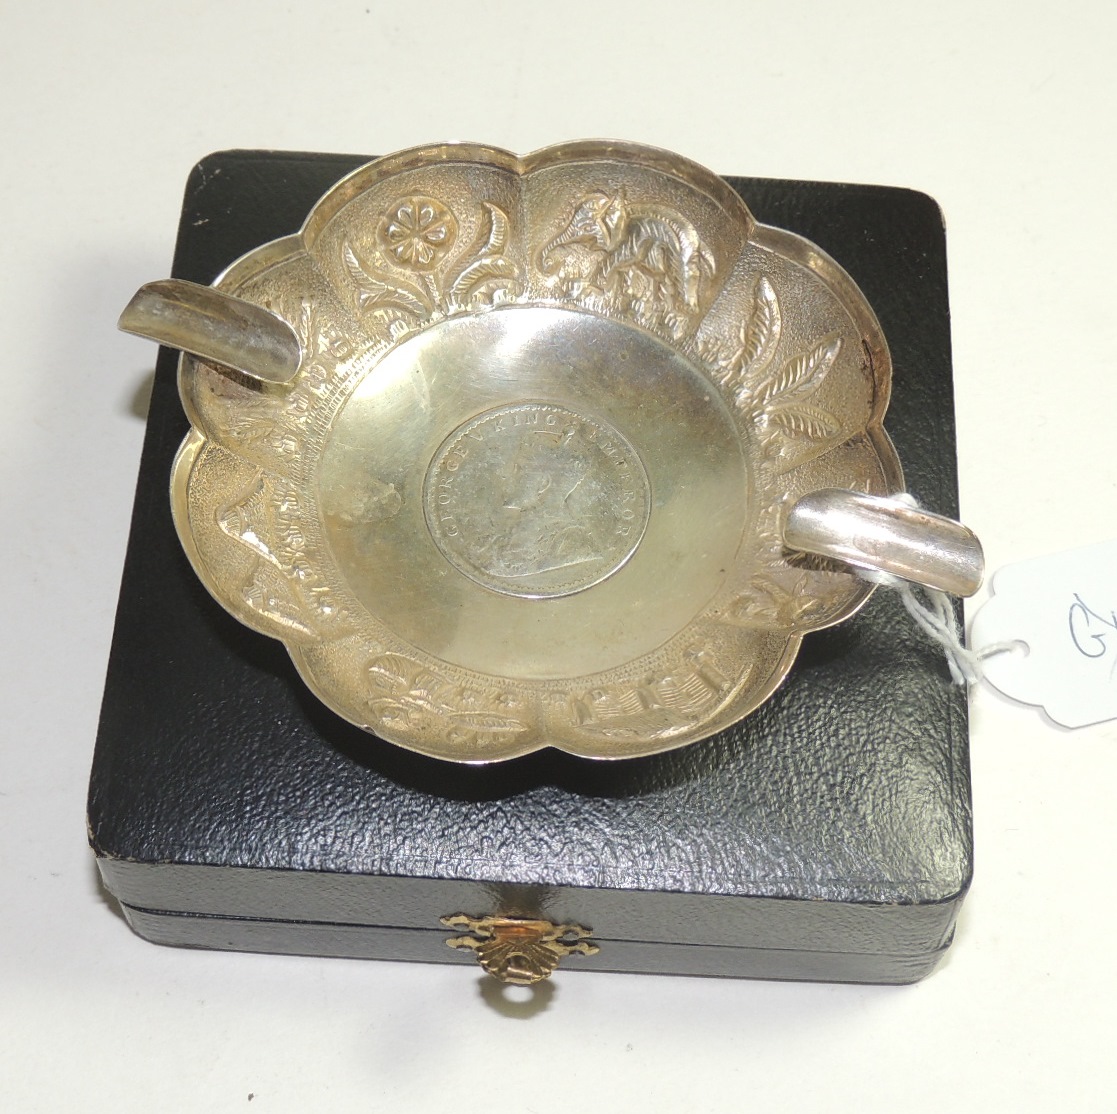 A cased, Indian white metal ashtray the centre set with a "one rupee" coin 1916, the sides